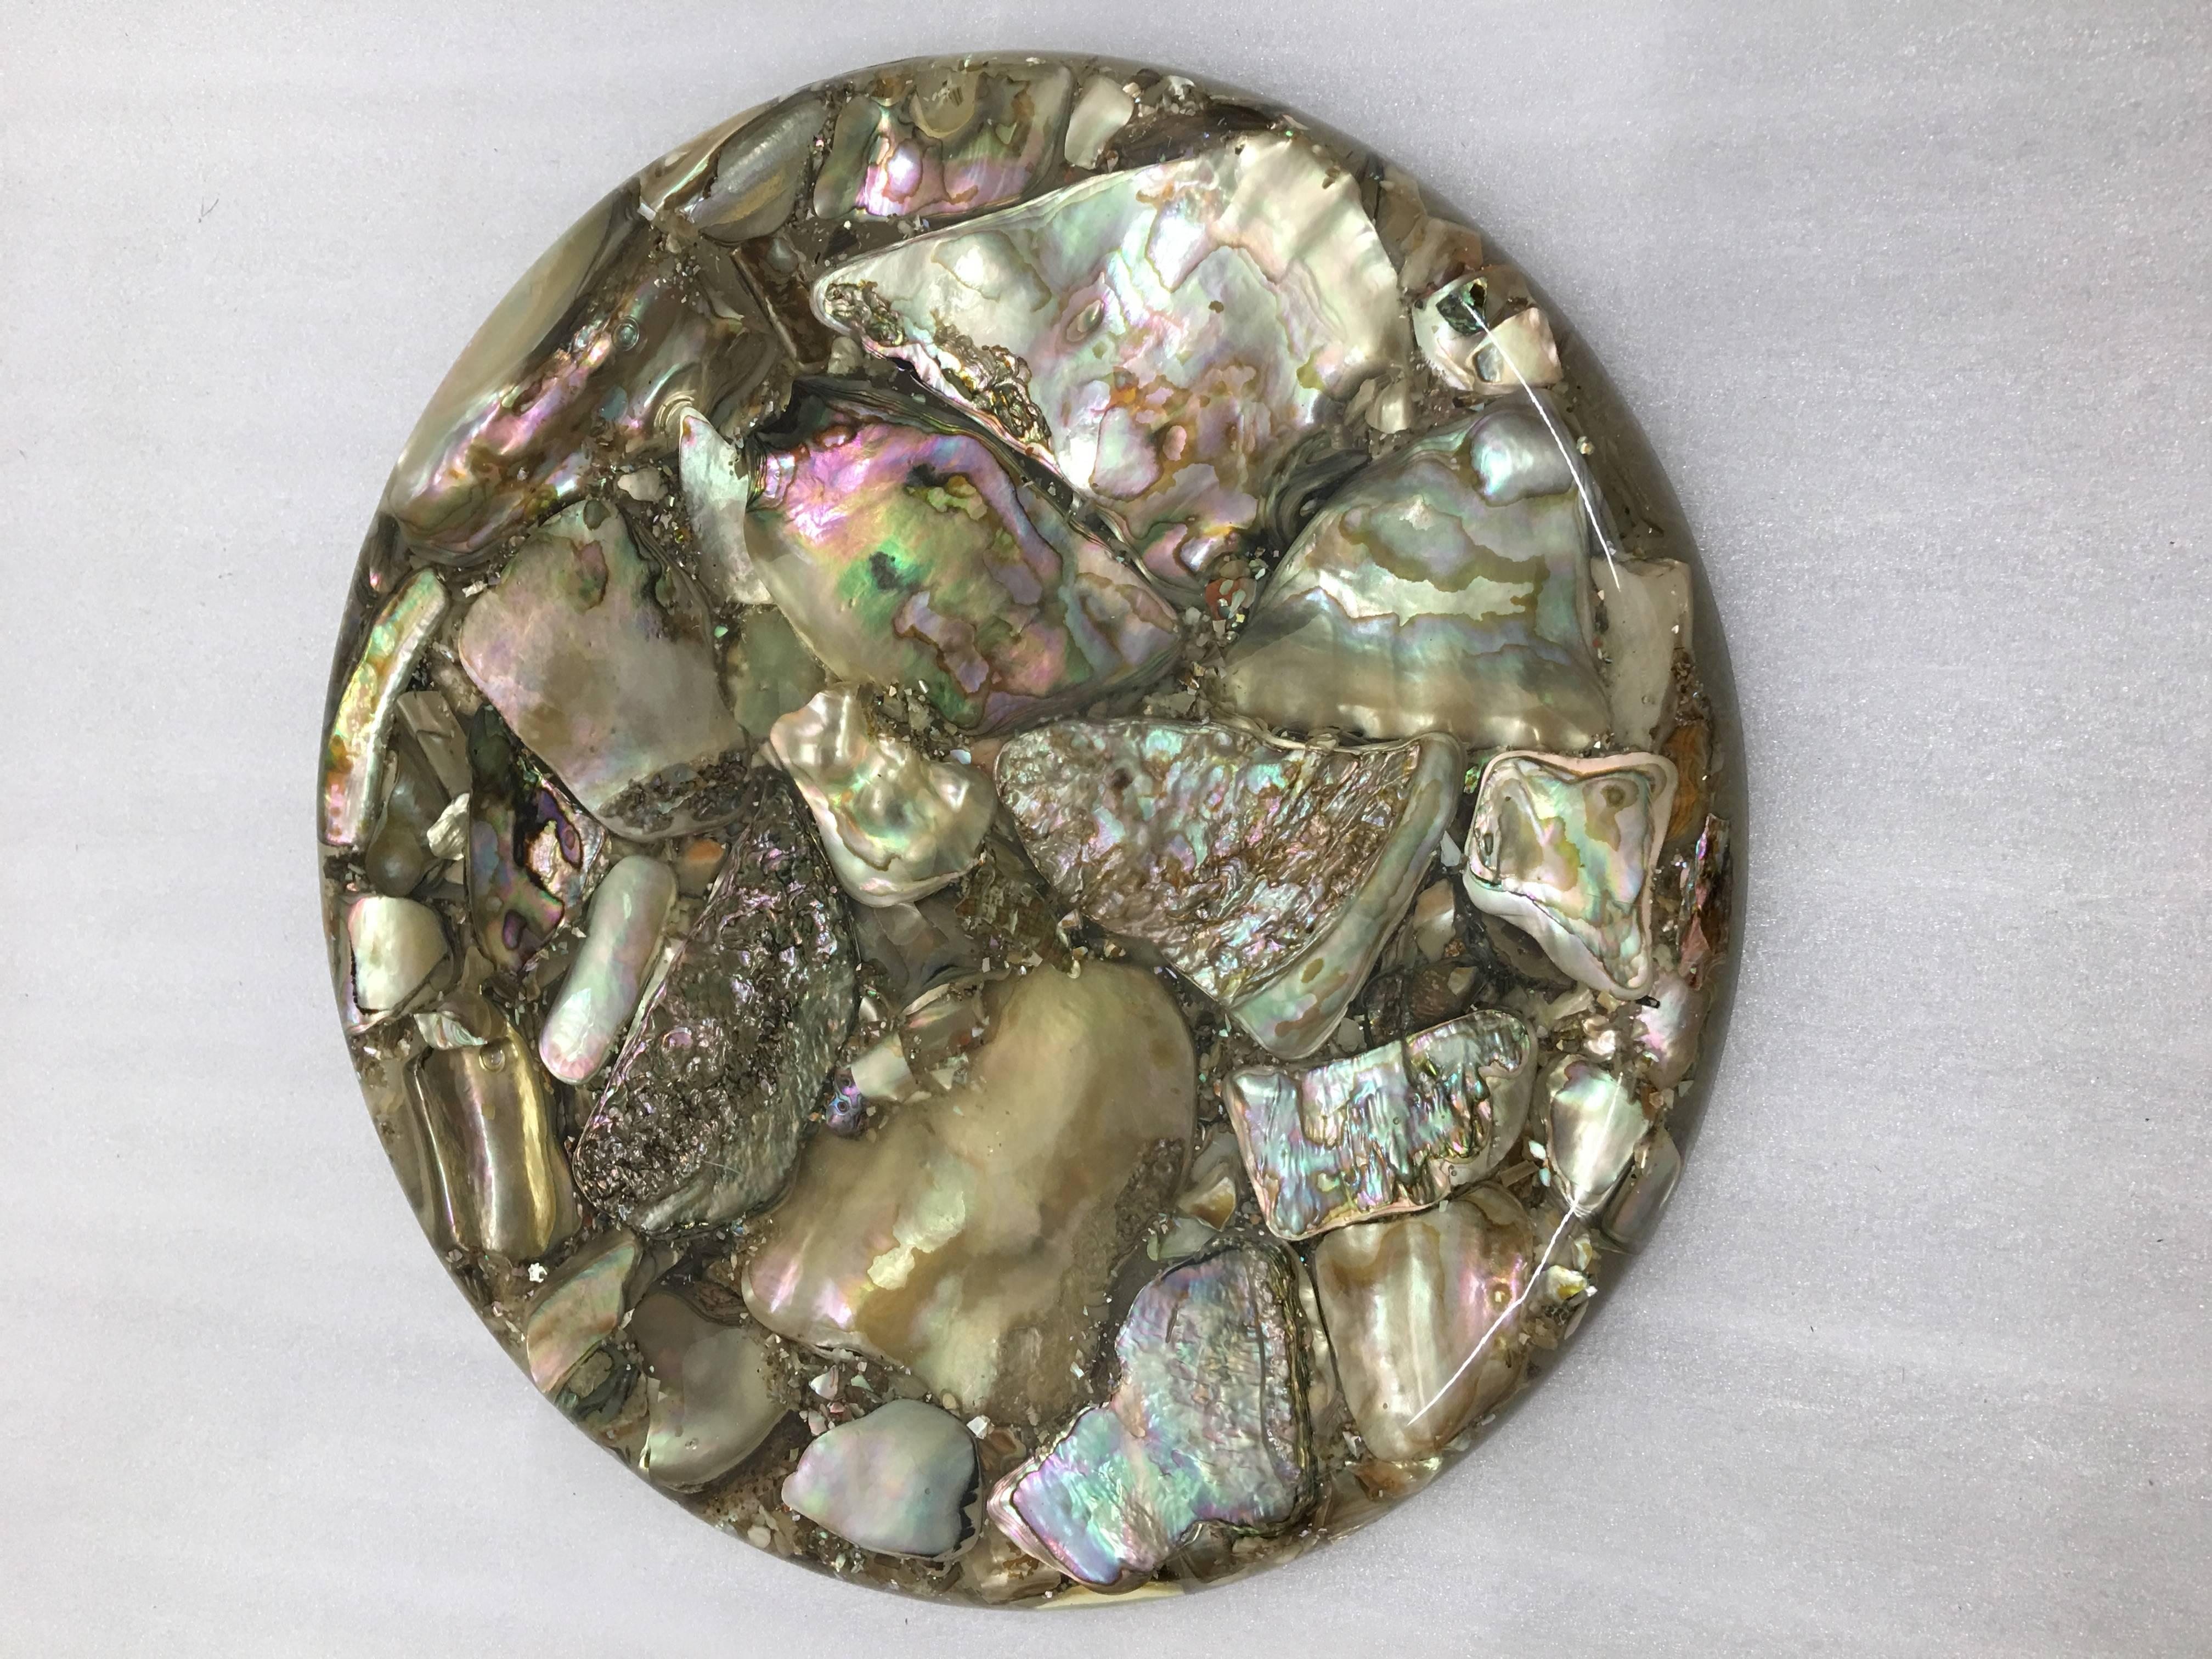 A small and fanciful abalone shell trivet or serving piece from Catalina Island.